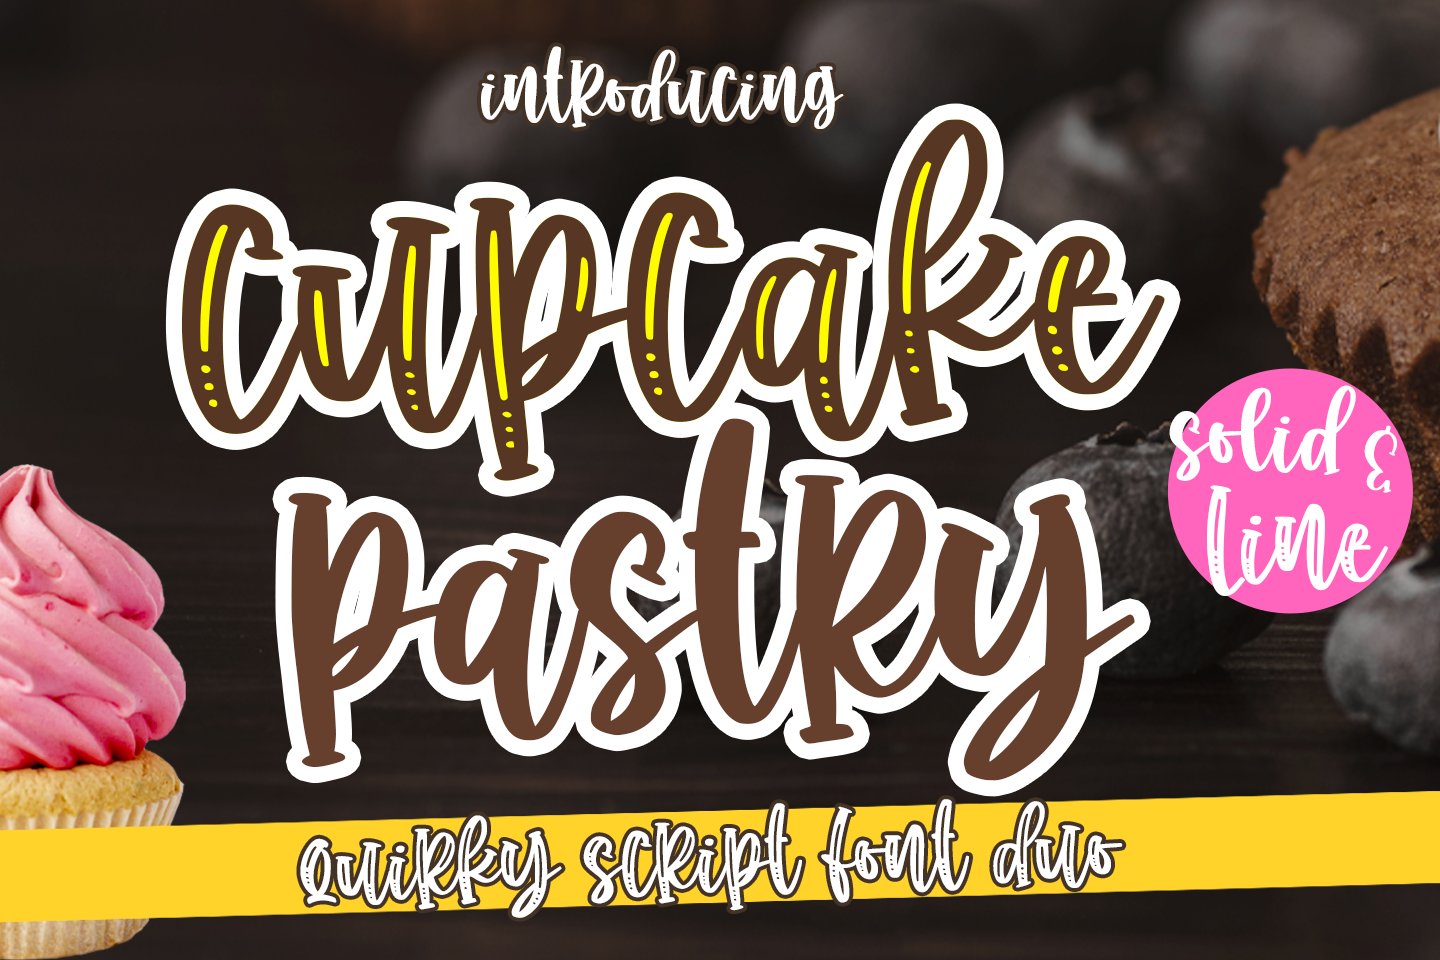 Cupcake Pastry cover image.